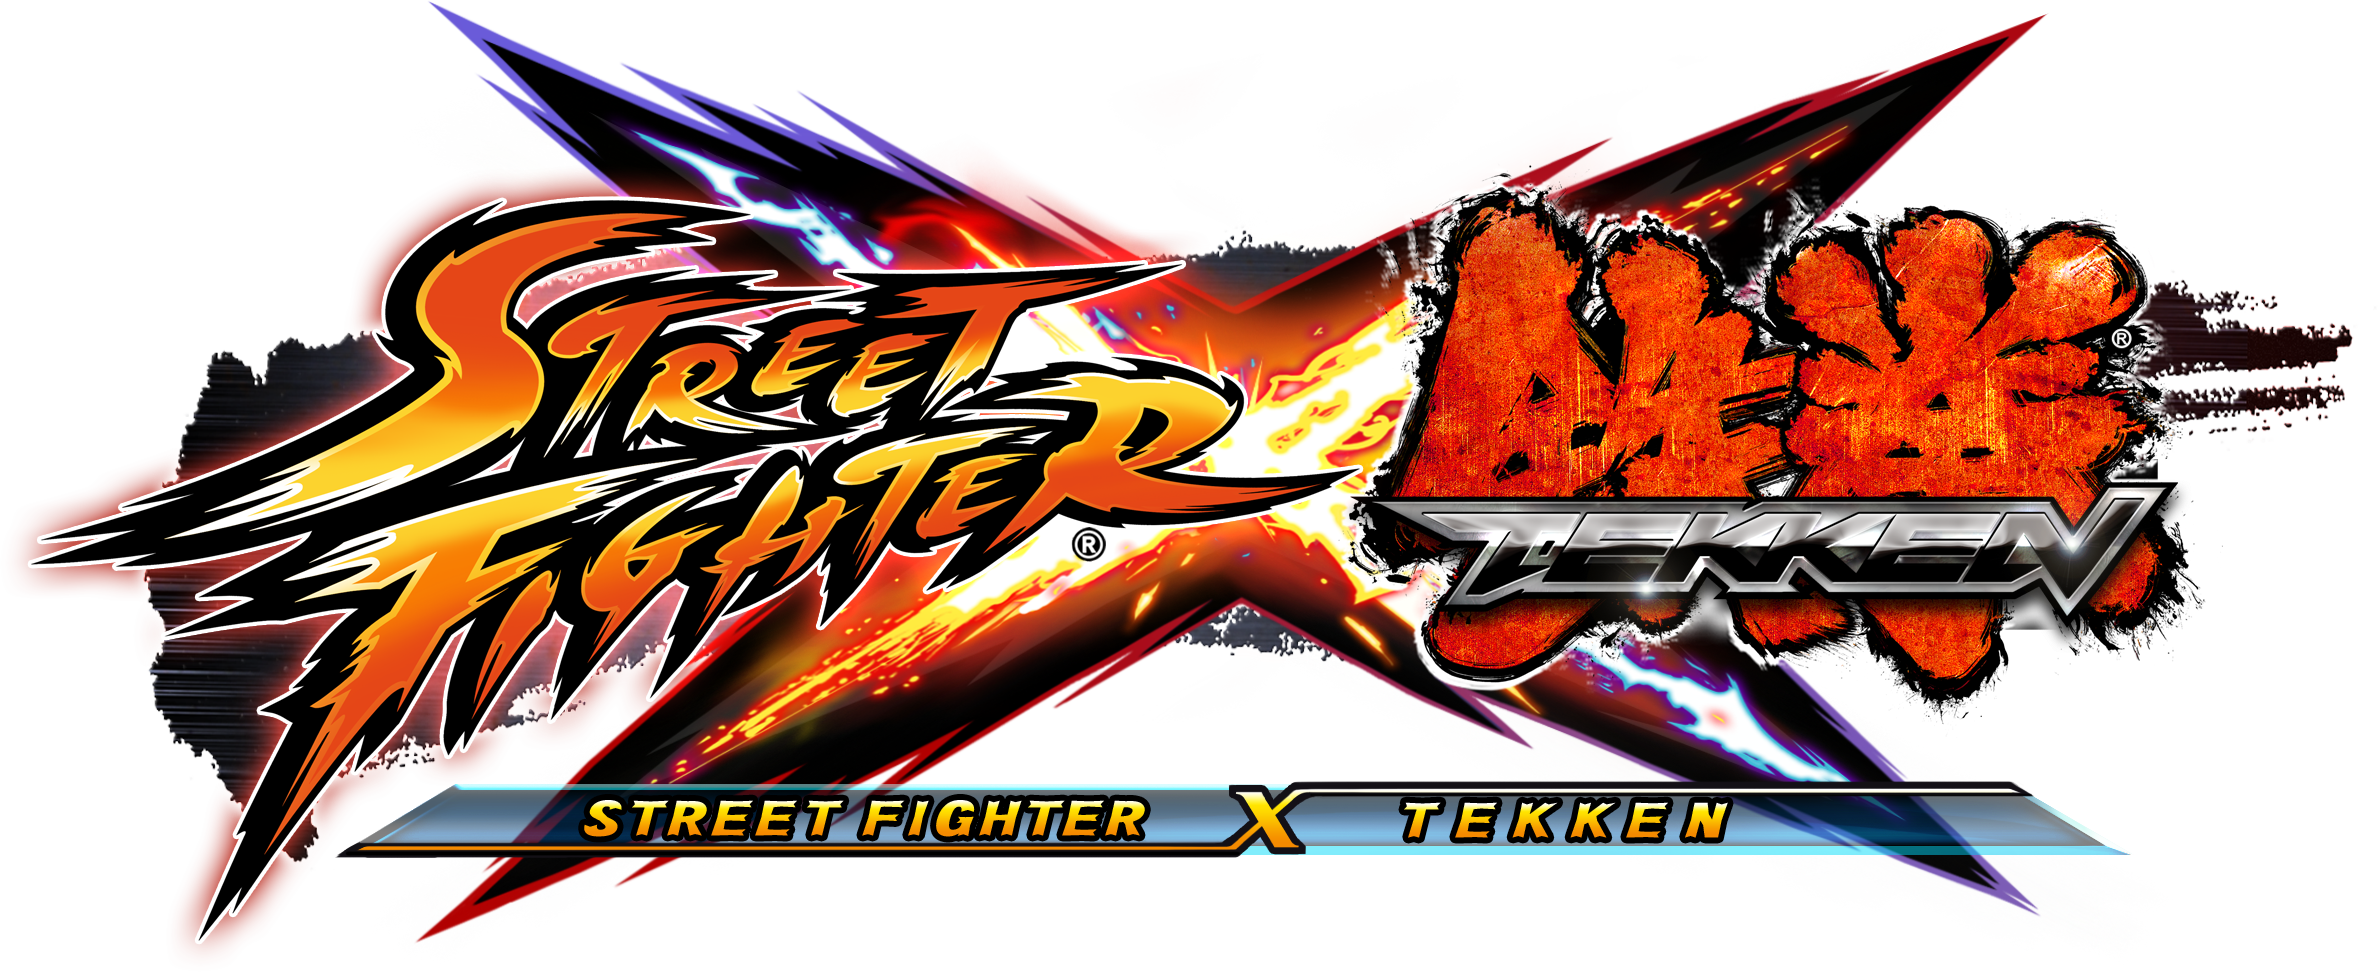 street fighter 5 free download for pc full version no crack